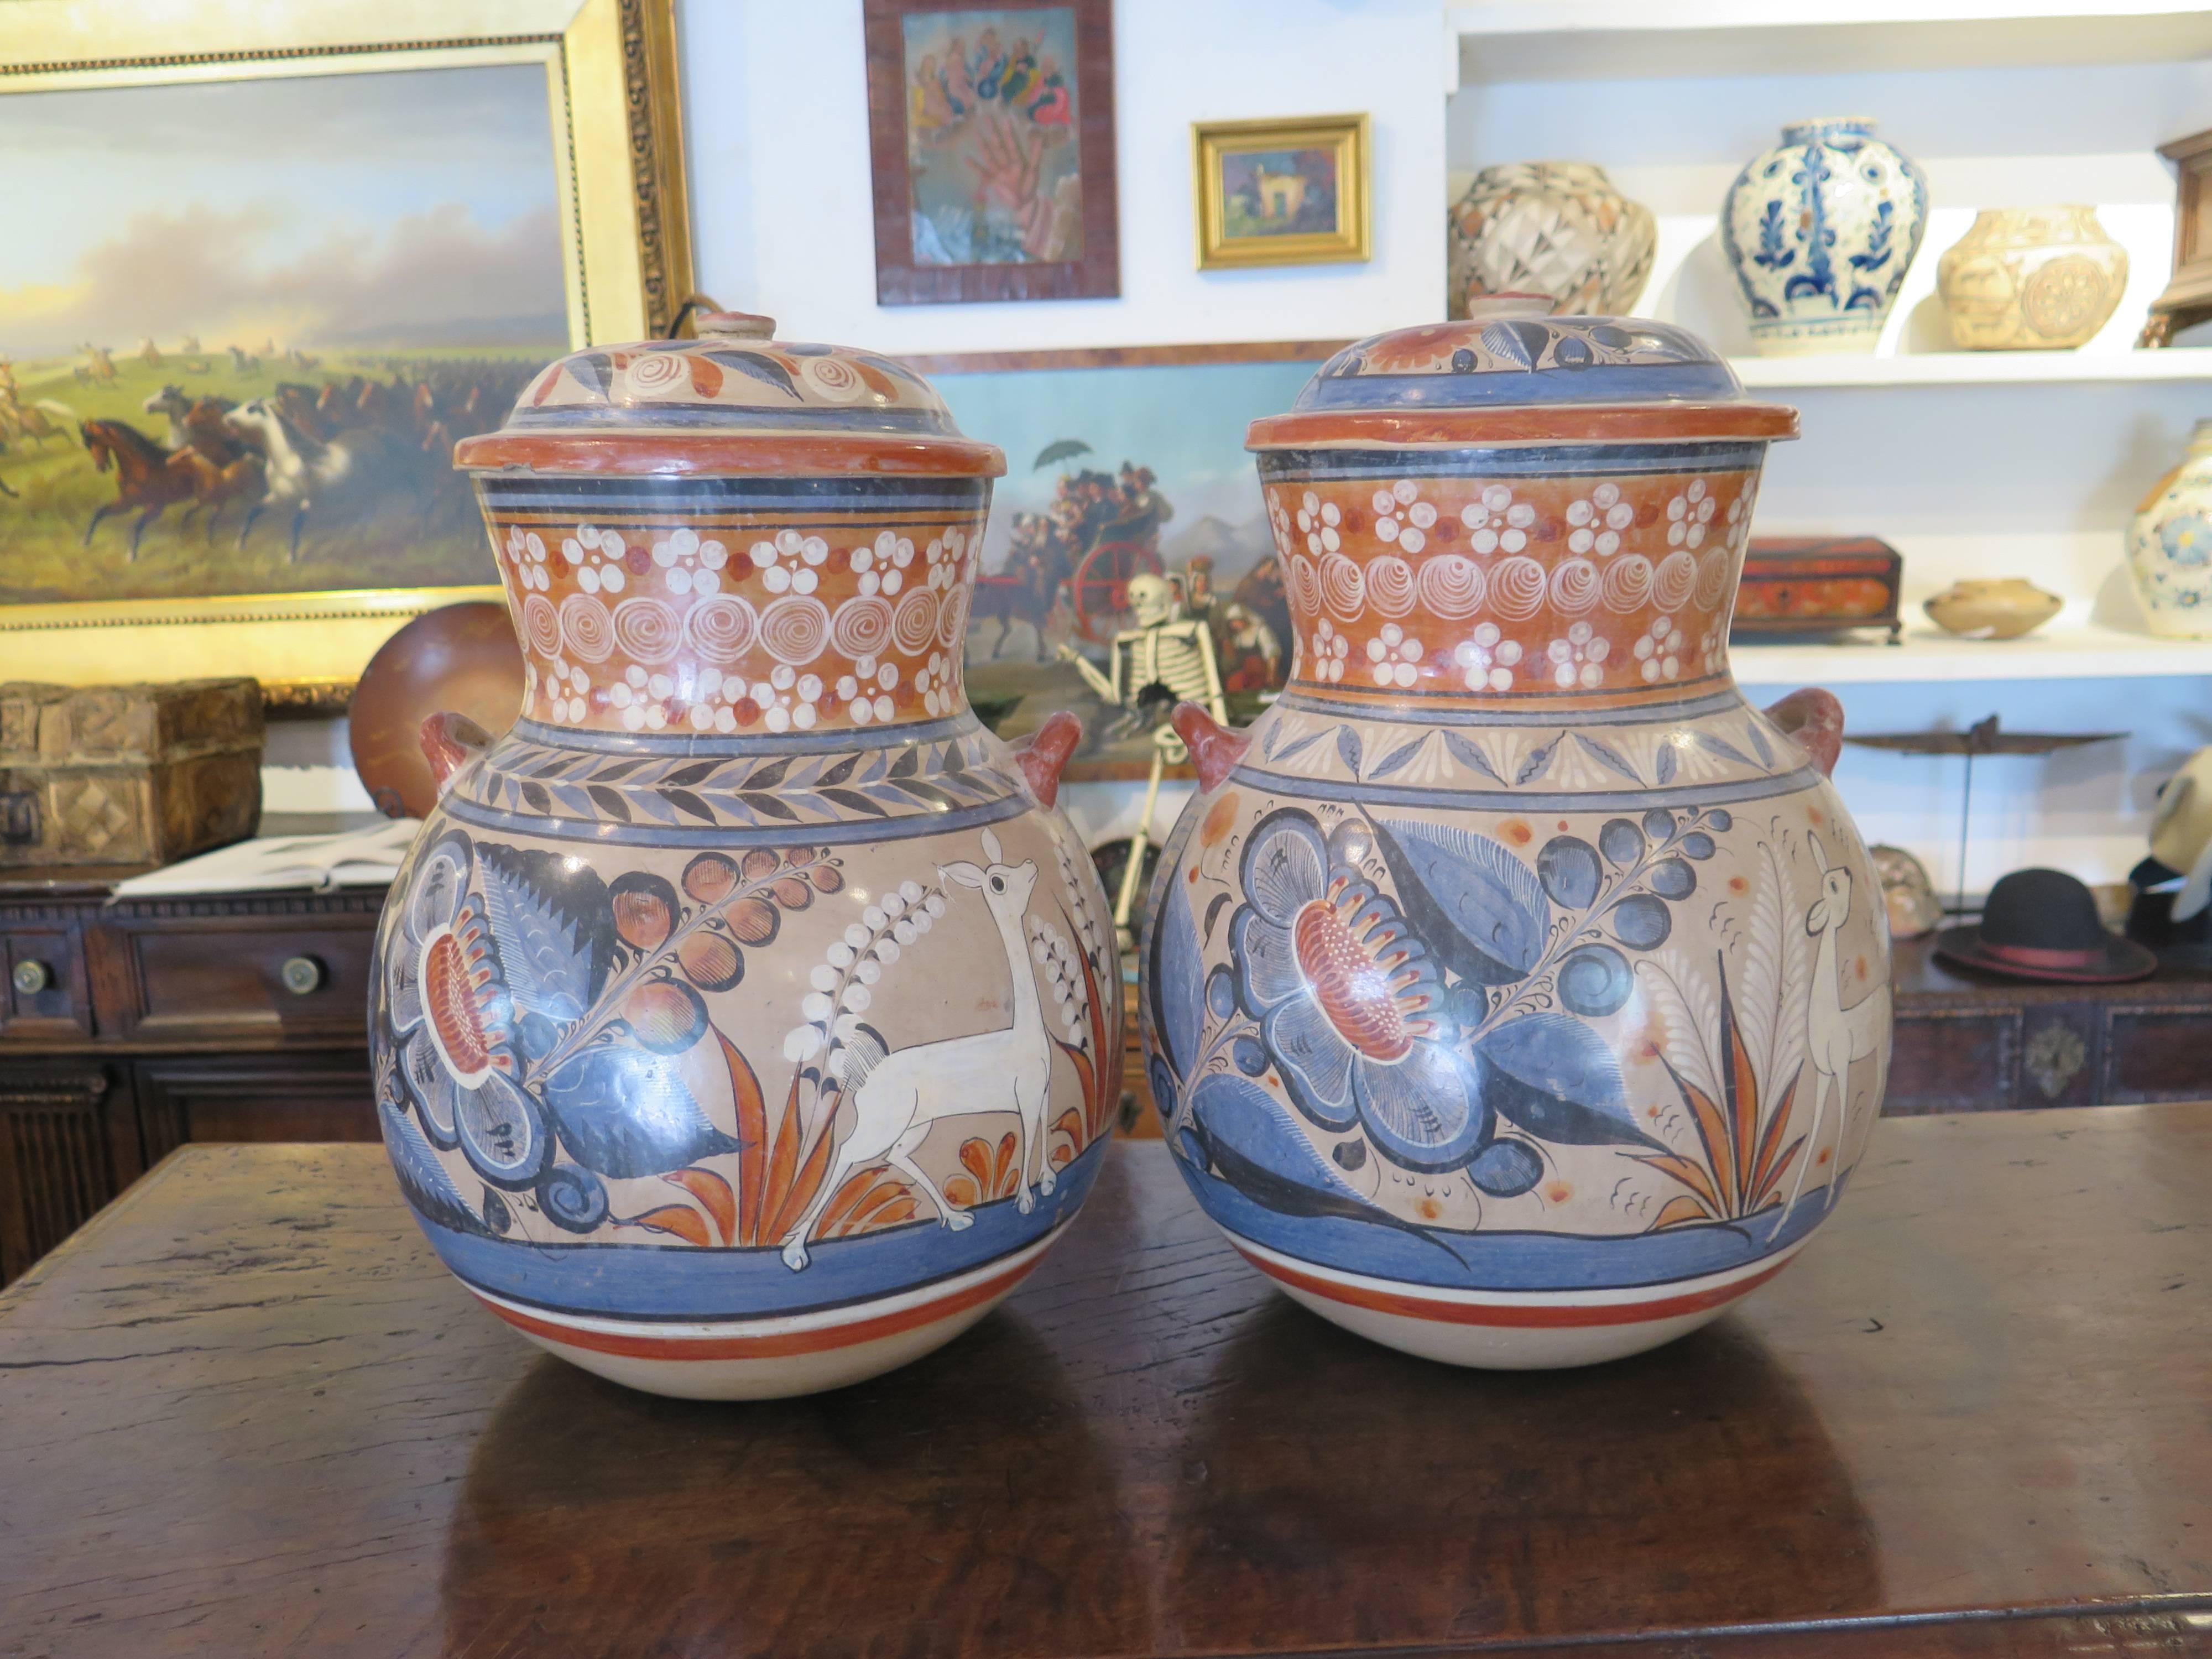 Nice looking pair of vintage Mexican Tonola jars with floral and animal designs.